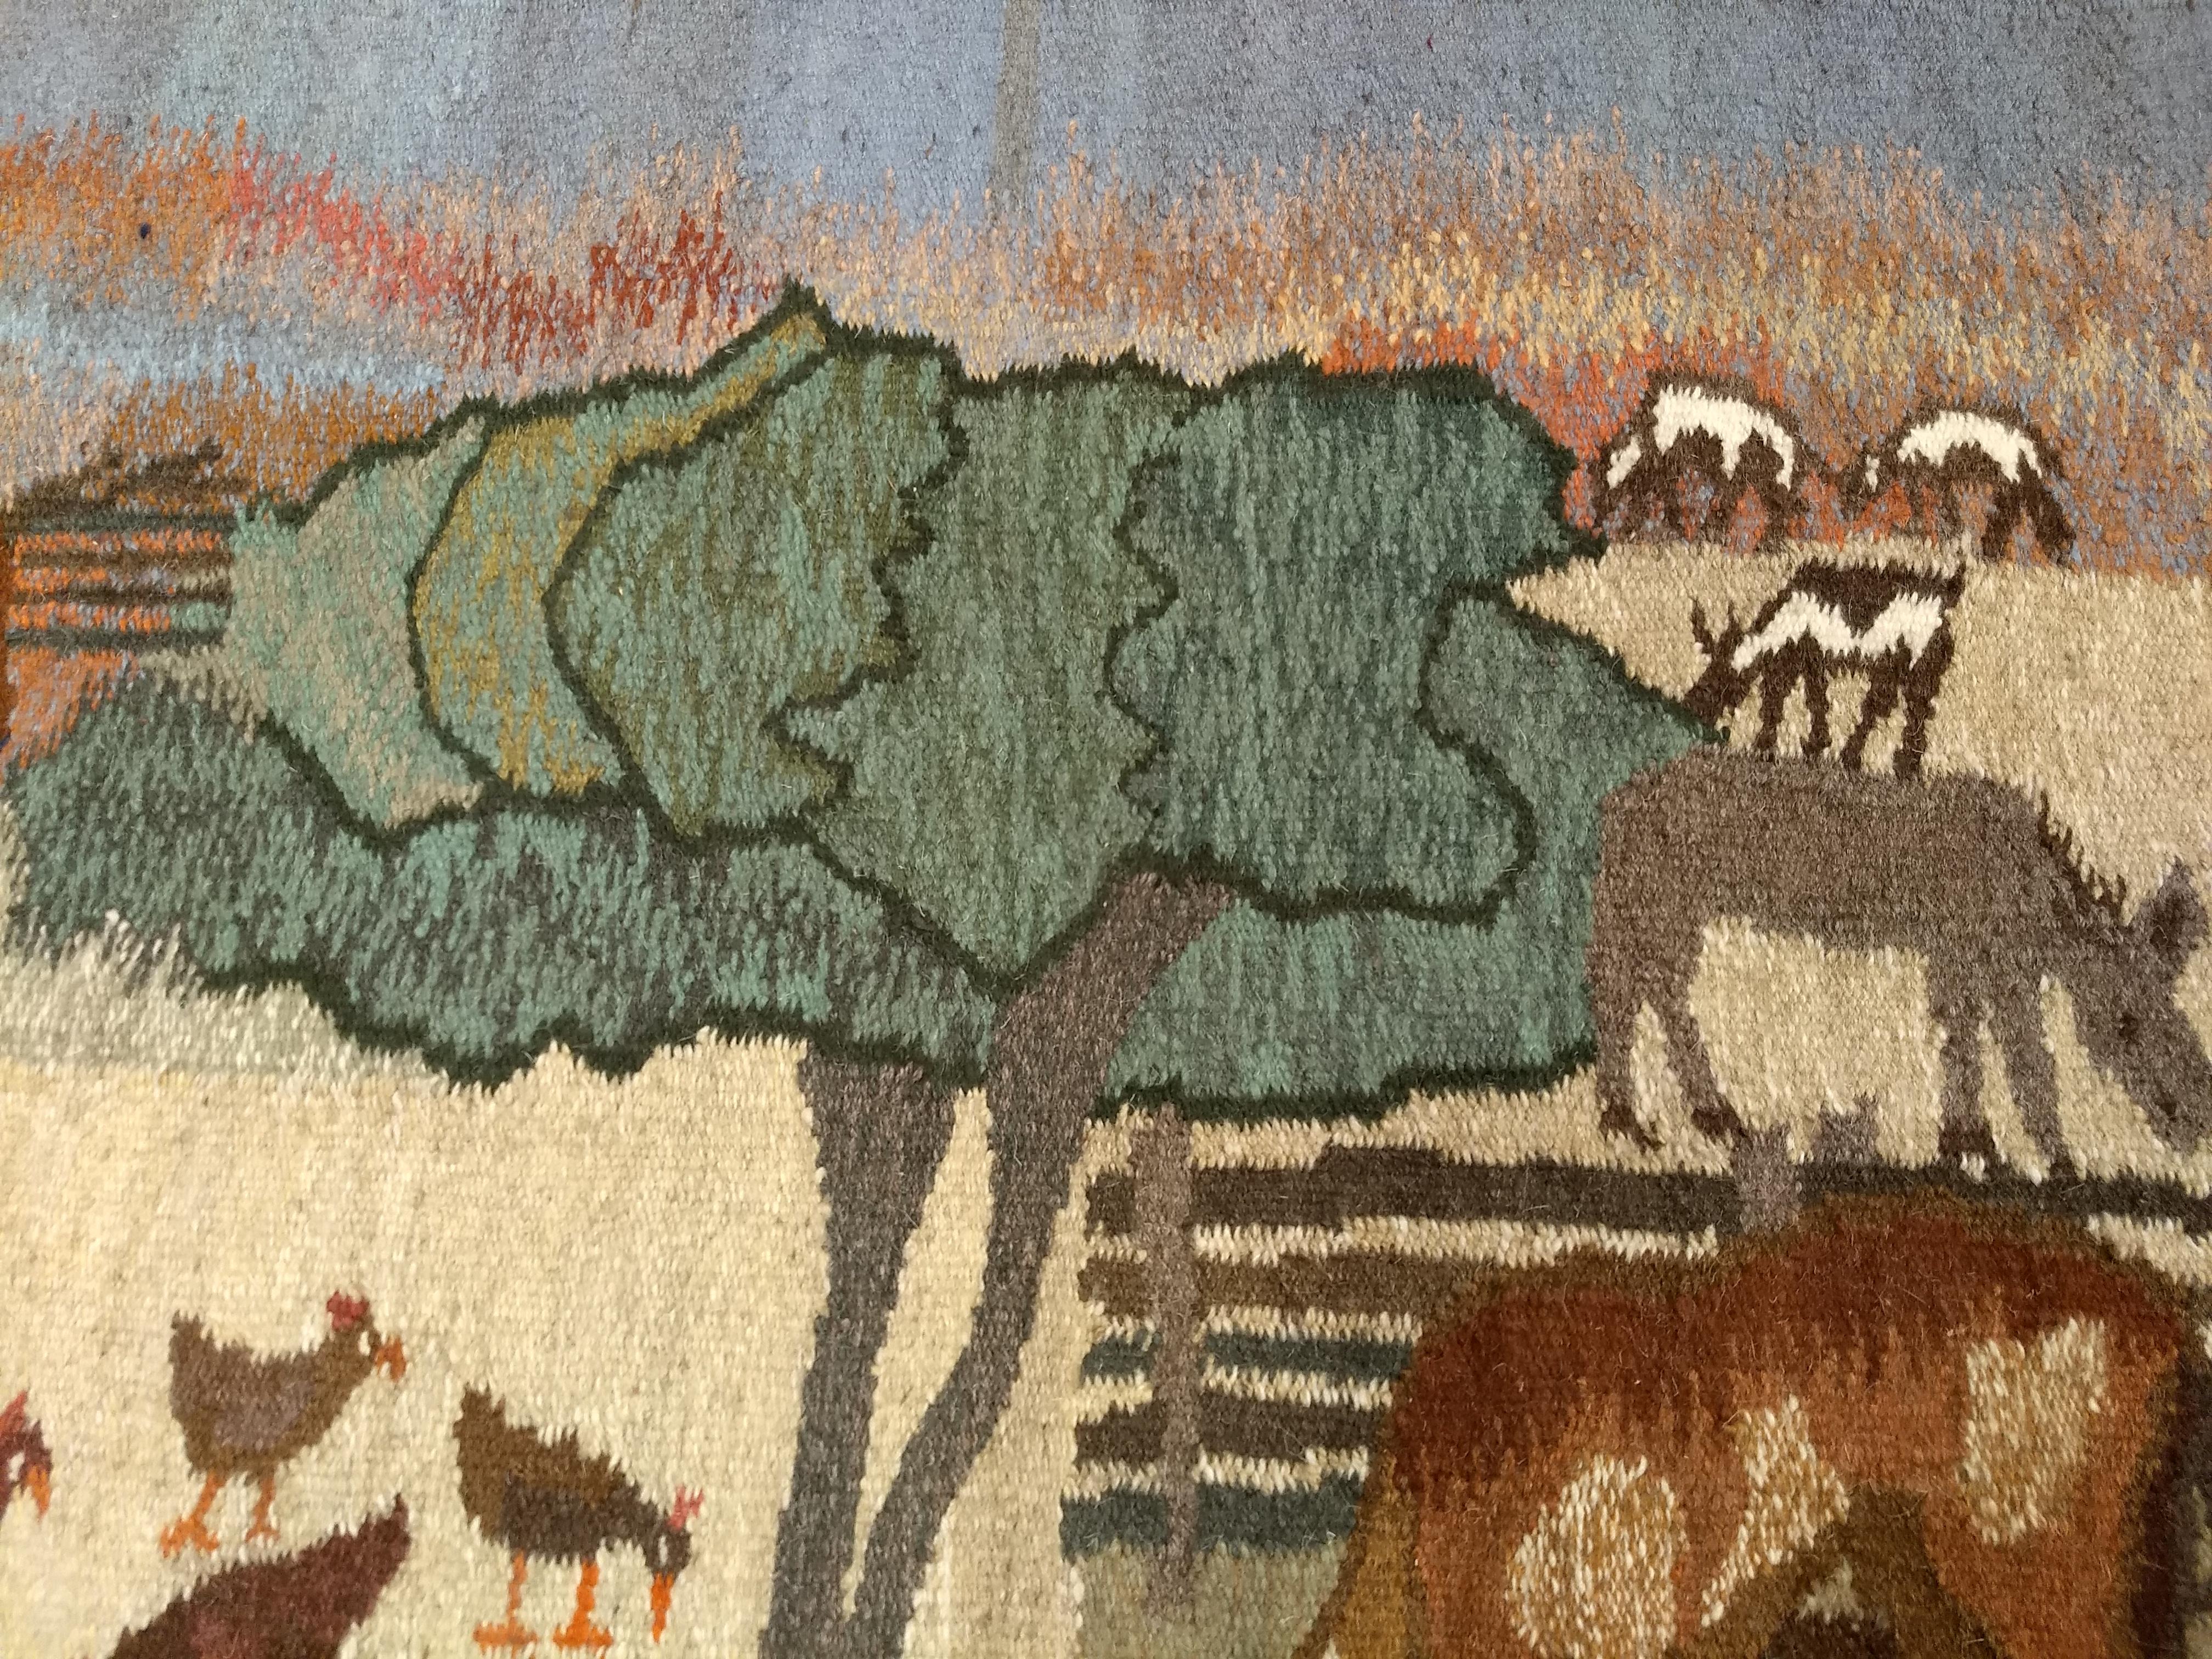 Vintage Hand Woven African Tapestry Depicting Life Scenes Around a Village In Good Condition For Sale In Barrington, IL